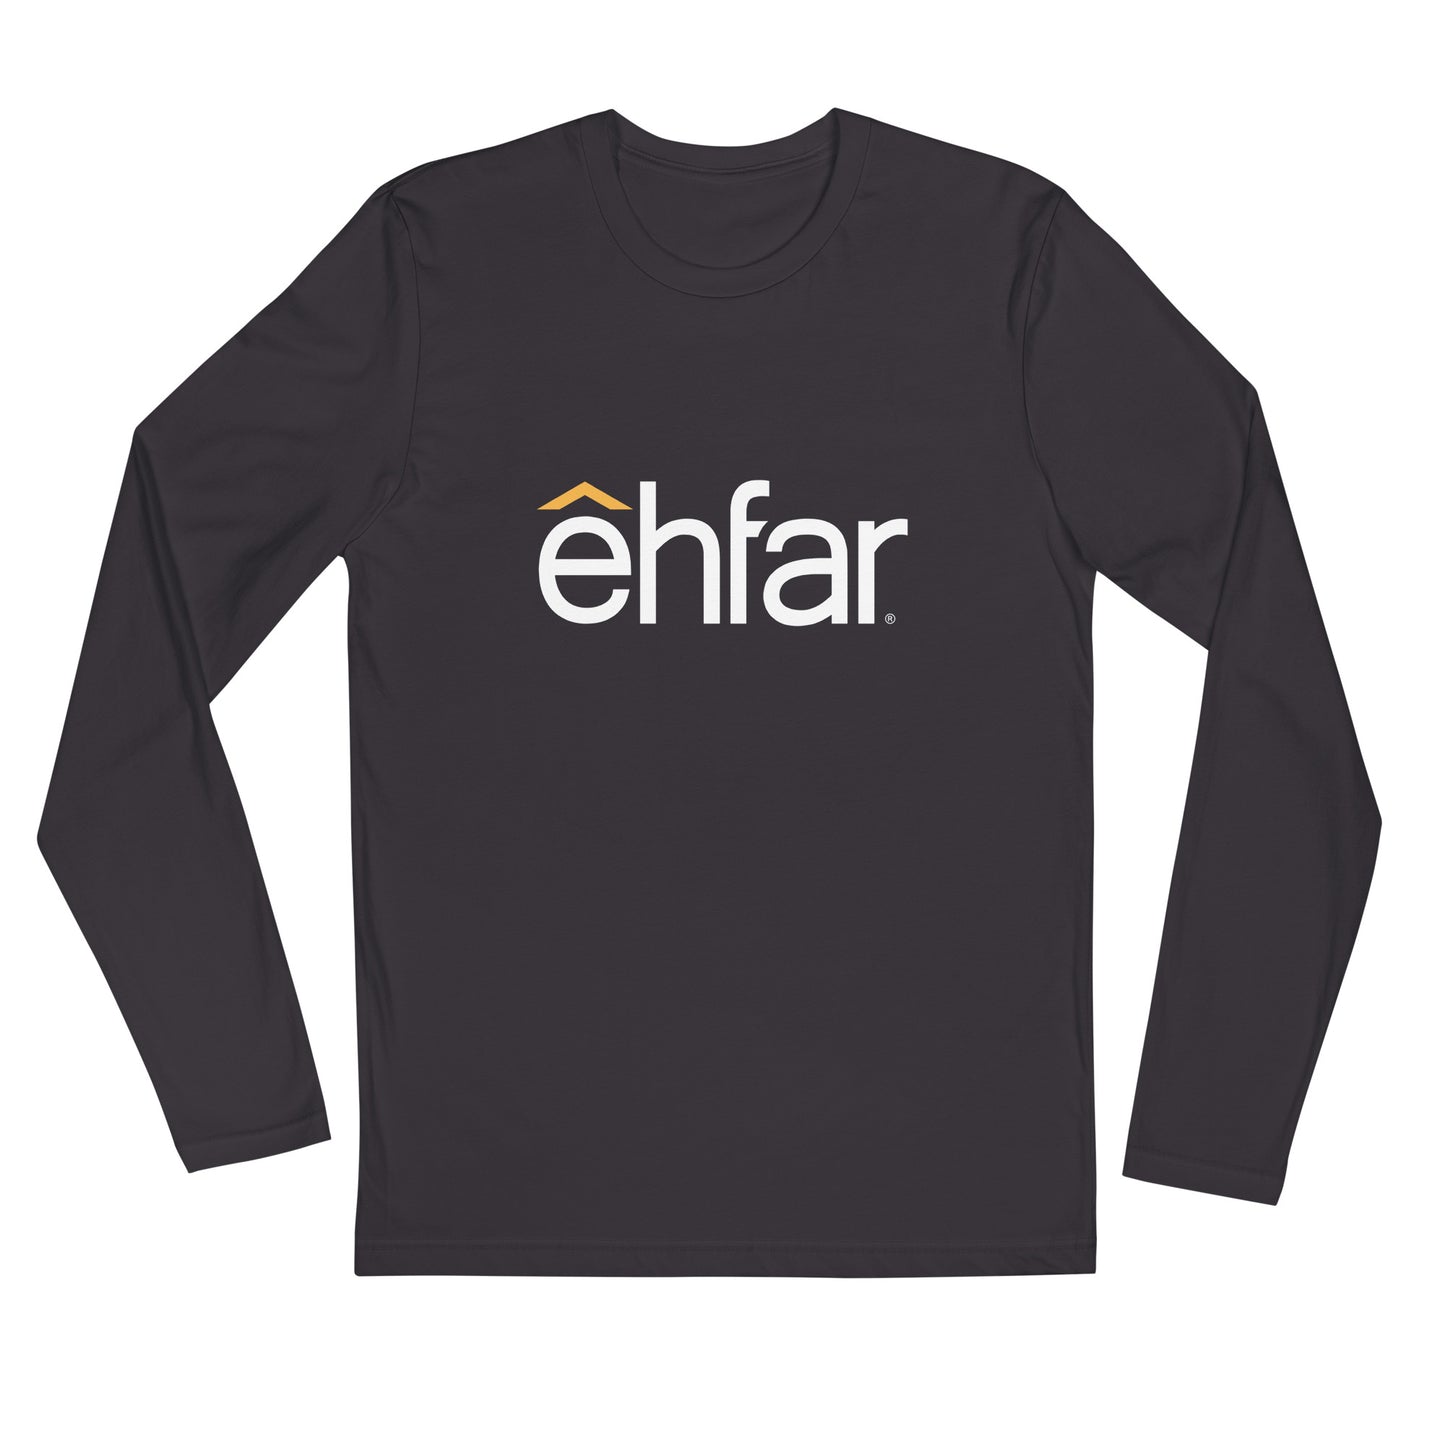 ehfar Long Sleeve Fitted Crew